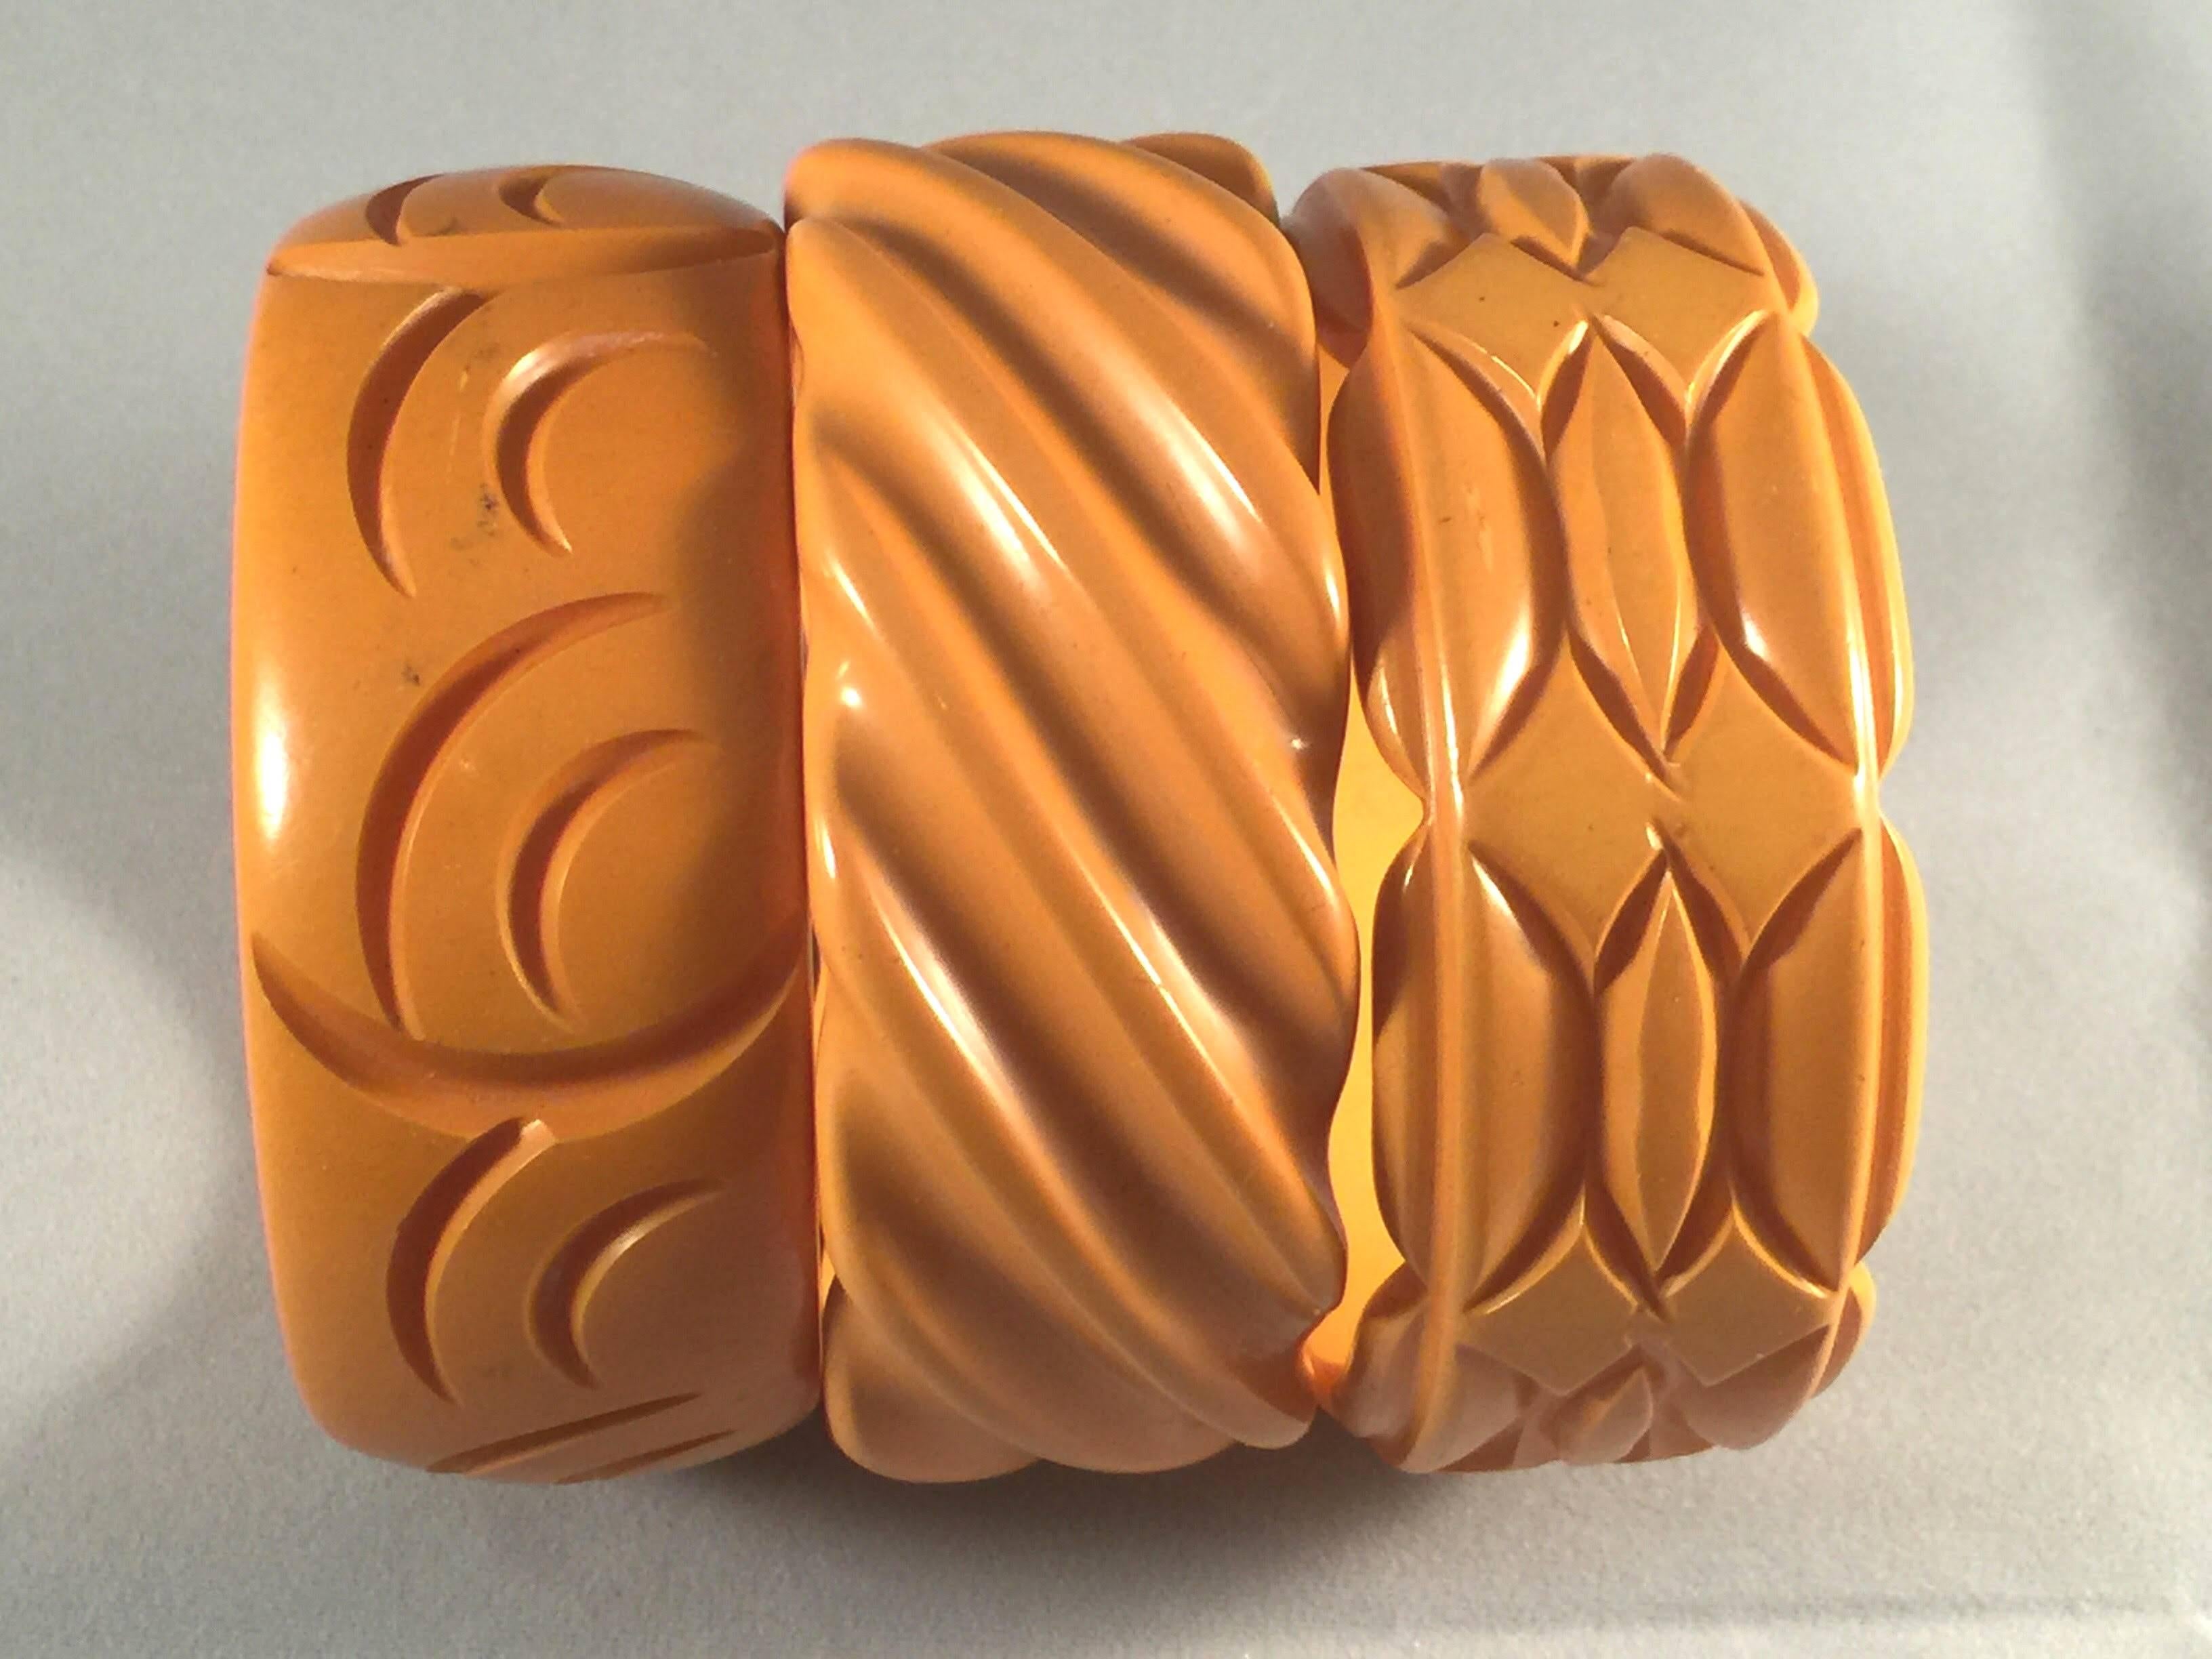 This group of three 1930s bakelite bangles in rich buttercream tones are classic thick chunky bangles which represent the beauty and the art of wearing bakelite bangles. Three bangles, each almost an inch wide, with standard inner diameters of 2.5